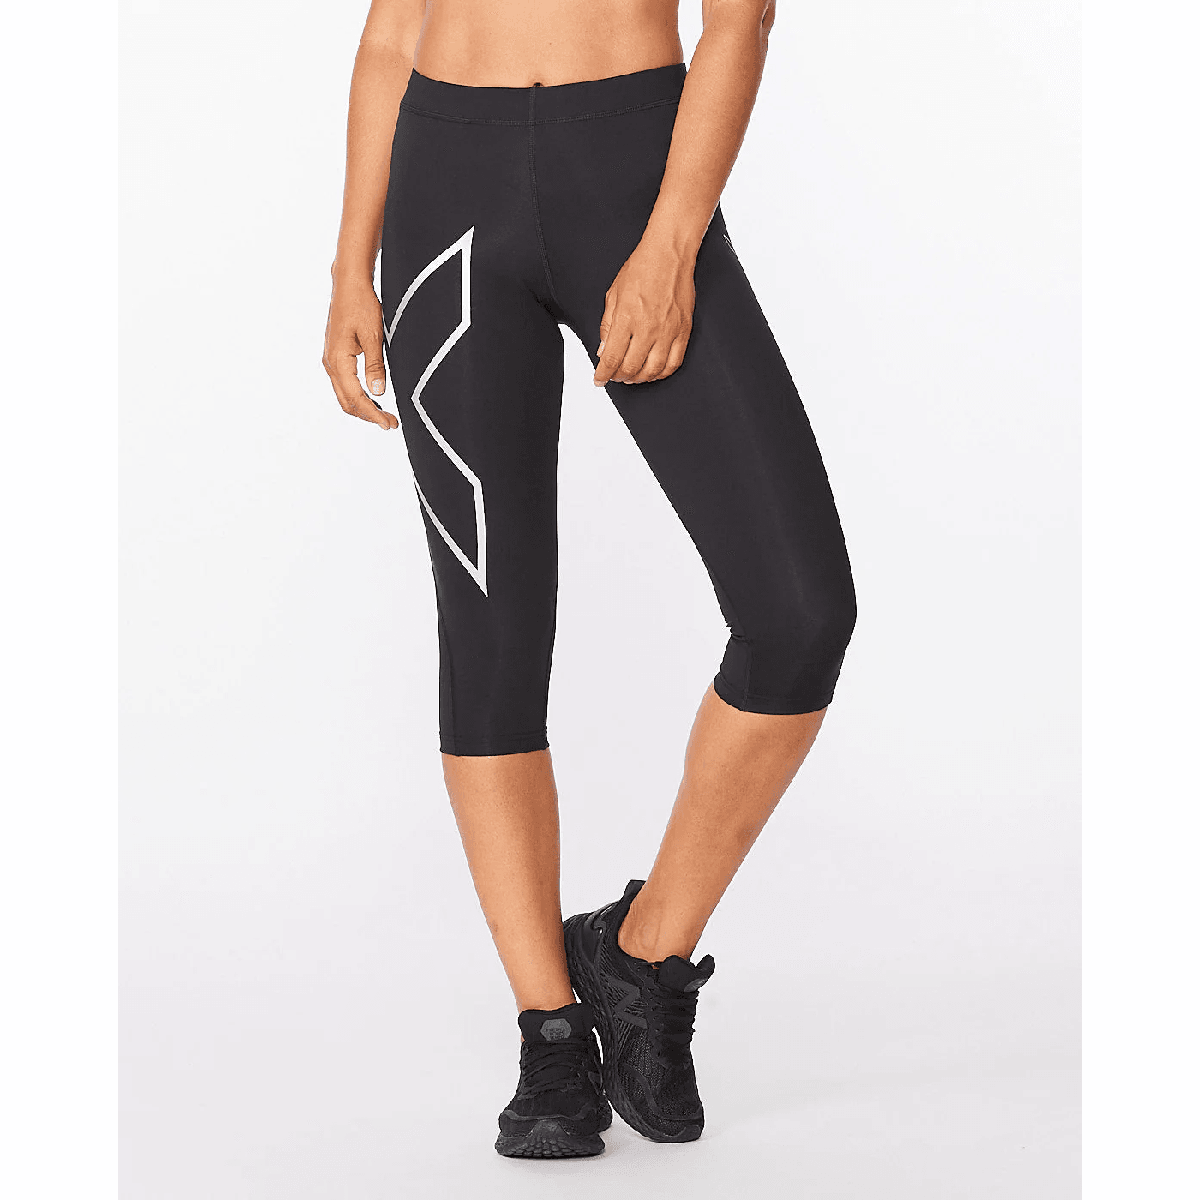 2XU Fitness Compression 3/4 Tight, , large image number null